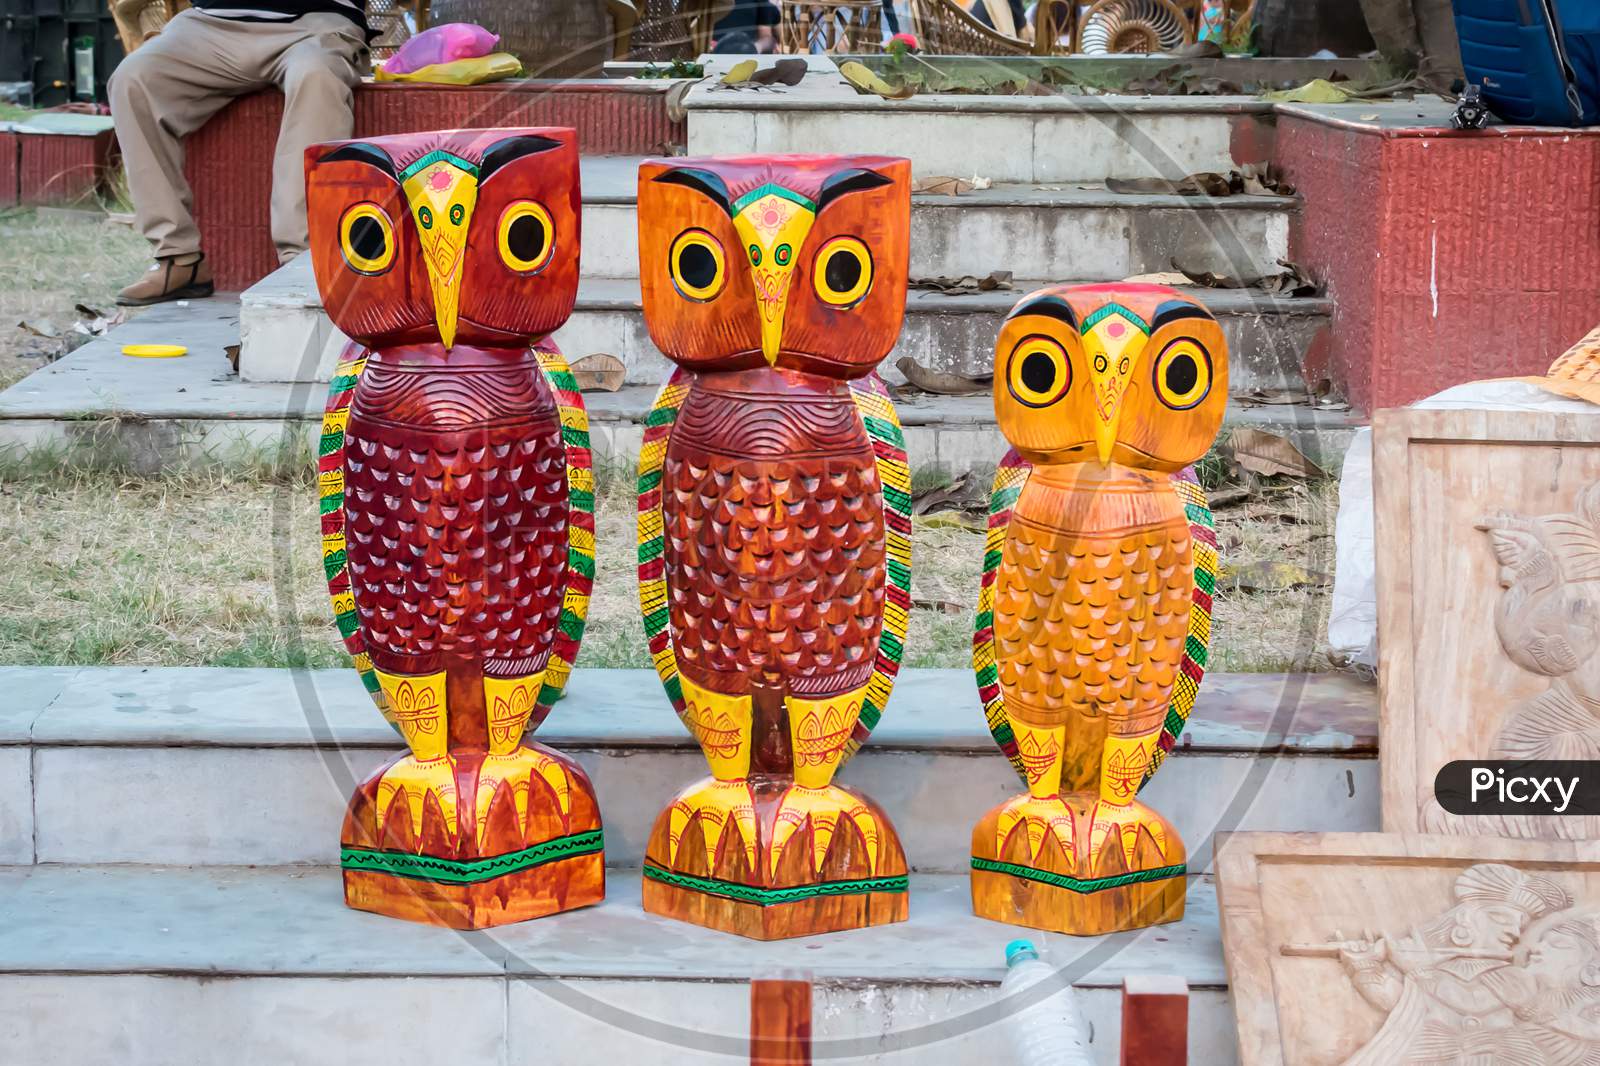 Indian Traditional Handmade Wooden Toys Owl Shaped Is Displayed In A Street Shop For Sale. Indian Handicraft And Art